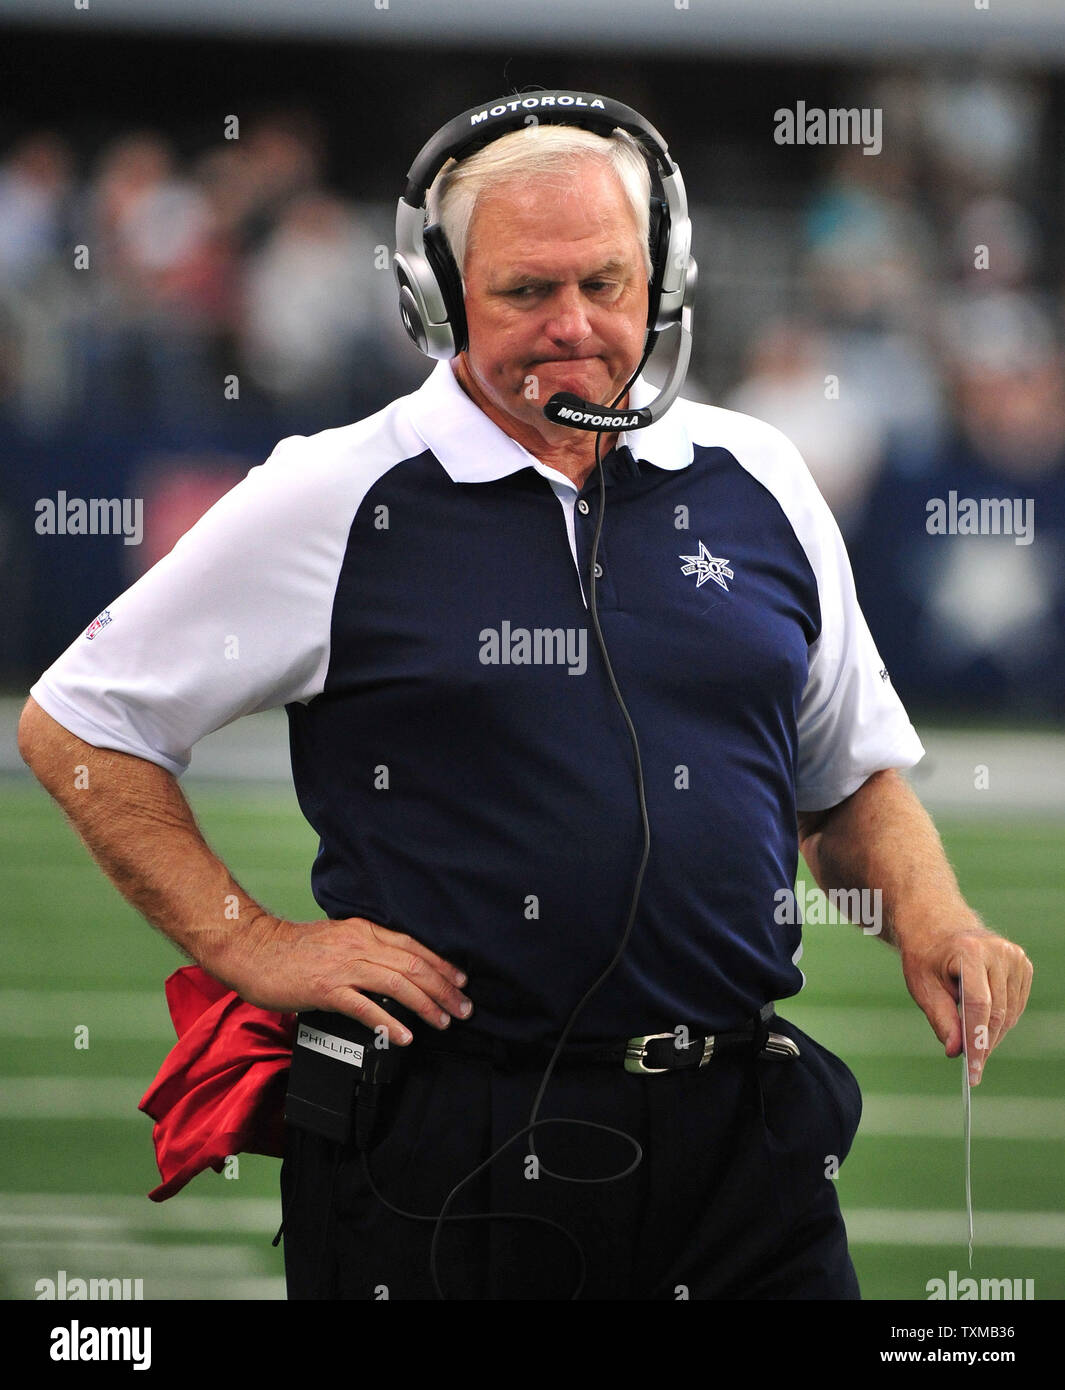 Dallas Cowboys' head coach Wade Phillips is seen on the sidelines as the  Cowboys play the Jacksonville Jaguars in Arlington, Texas October 31, 2010.  UPI/Kevin Dietsch Stock Photo - Alamy